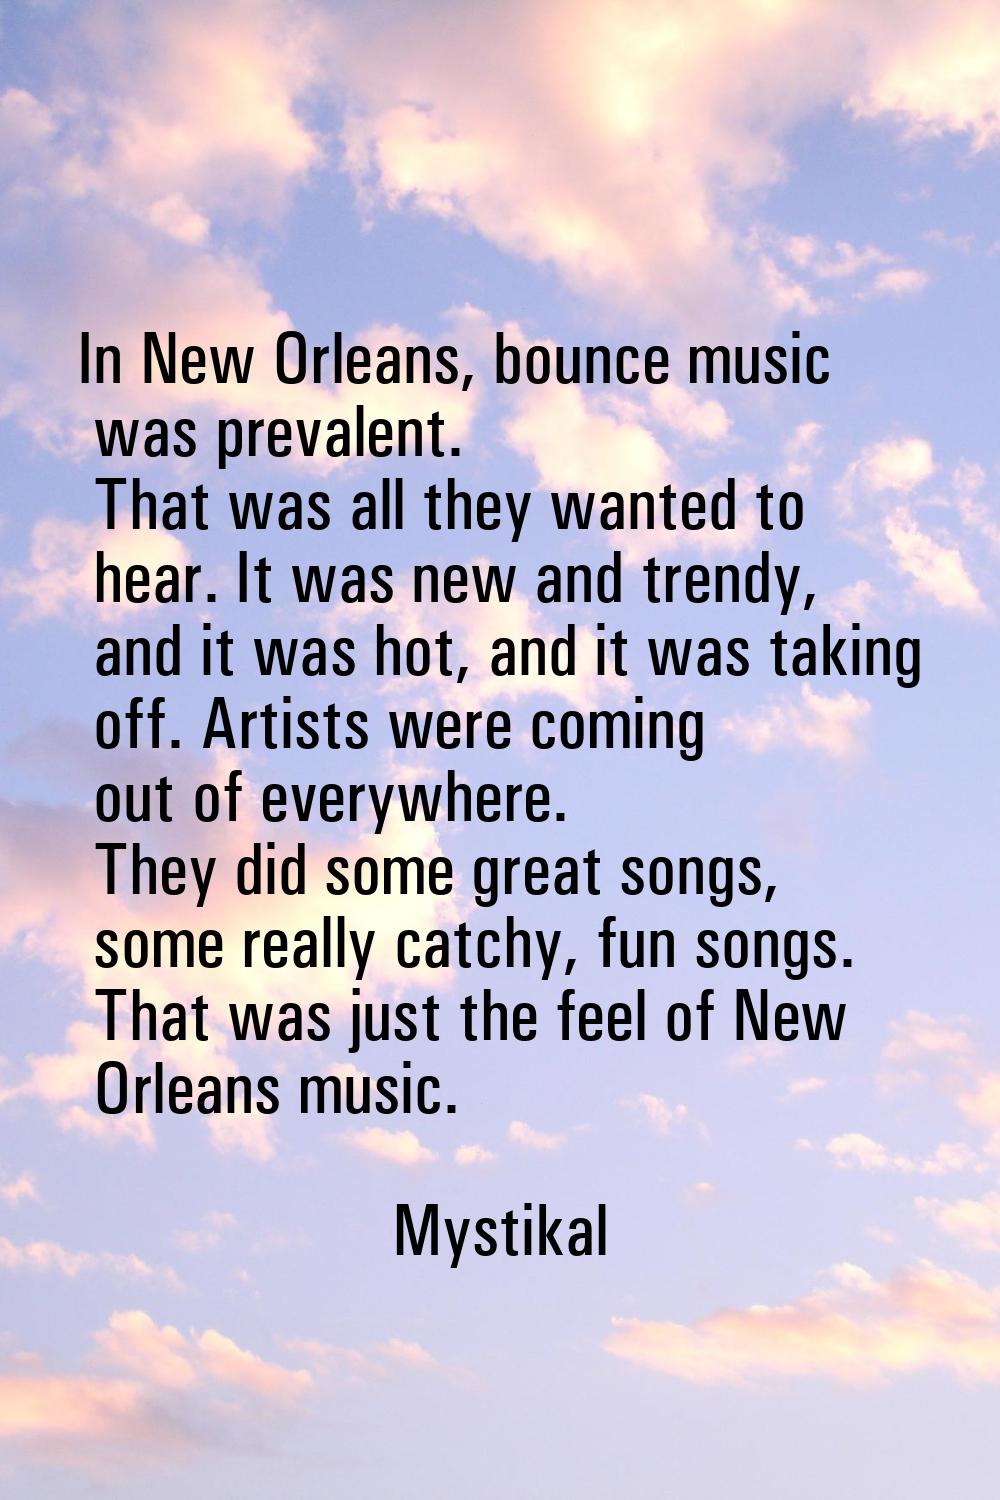 In New Orleans, bounce music was prevalent. That was all they wanted to hear. It was new and trendy